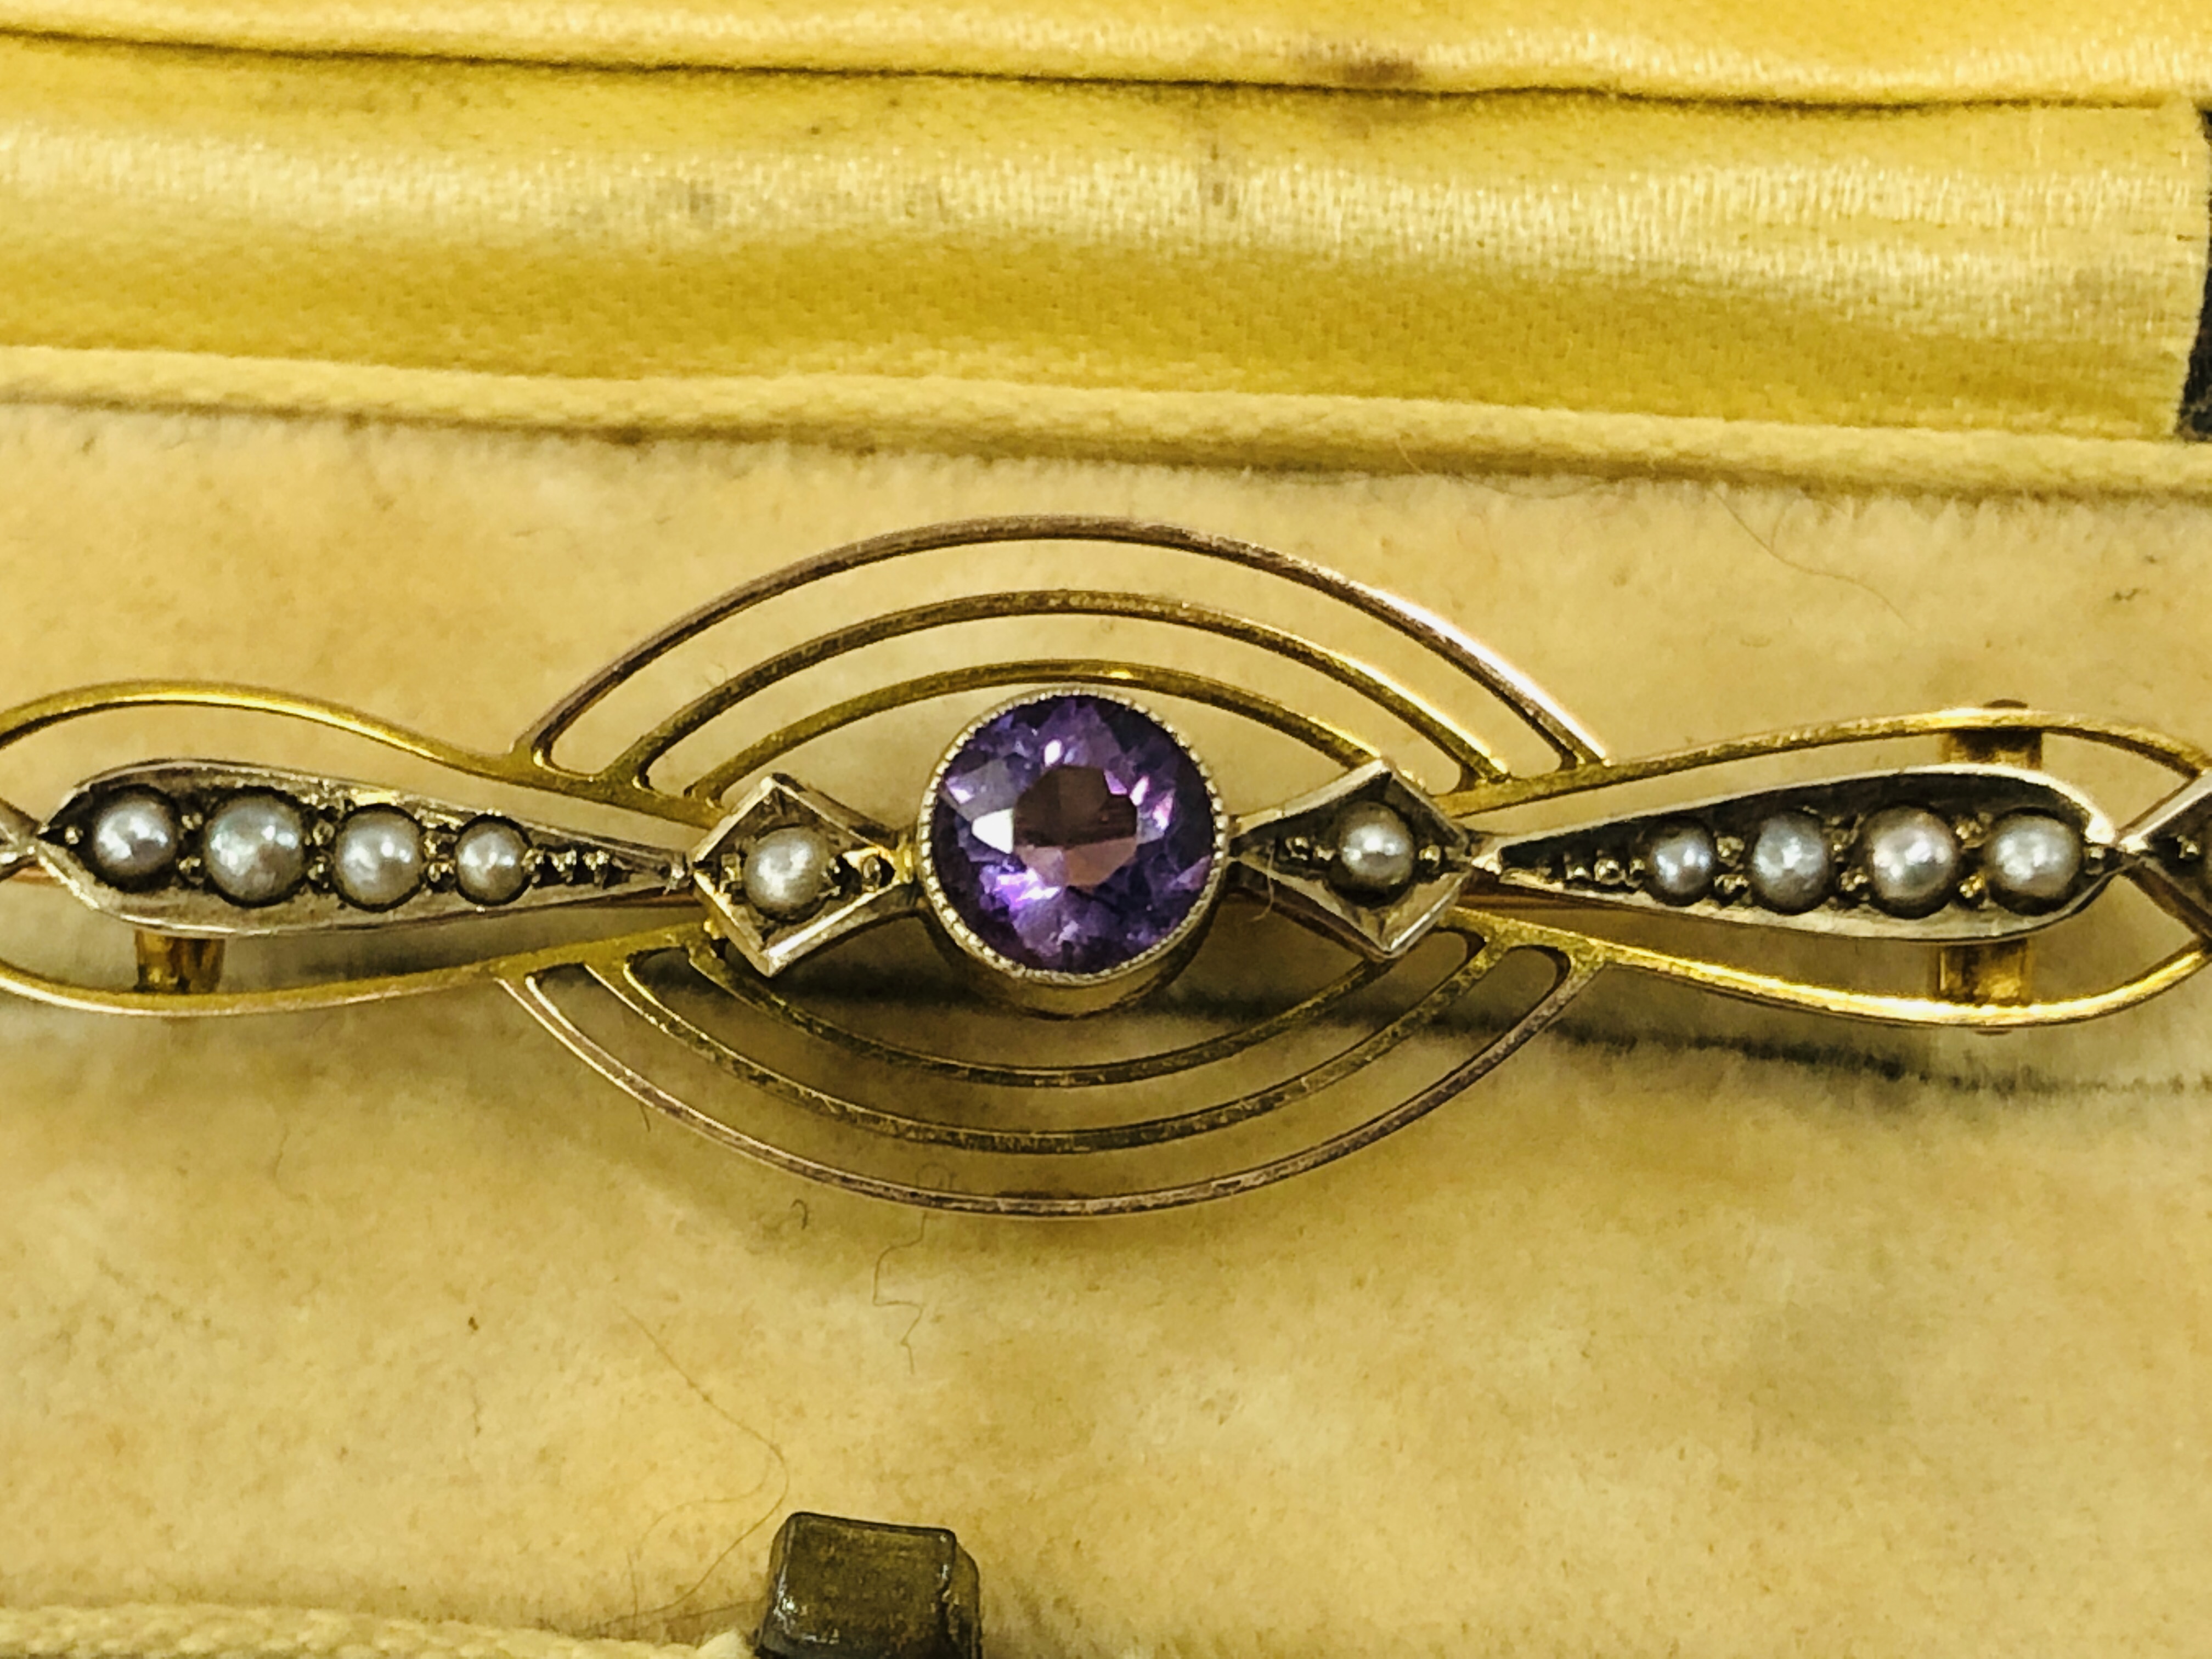 A VINTAGE 9CT BROOCH / PENDANT SET WITH CENTRAL AMETHYST AND SEED PEARLS IN A VINTAGE BOX MARKED - Image 4 of 6